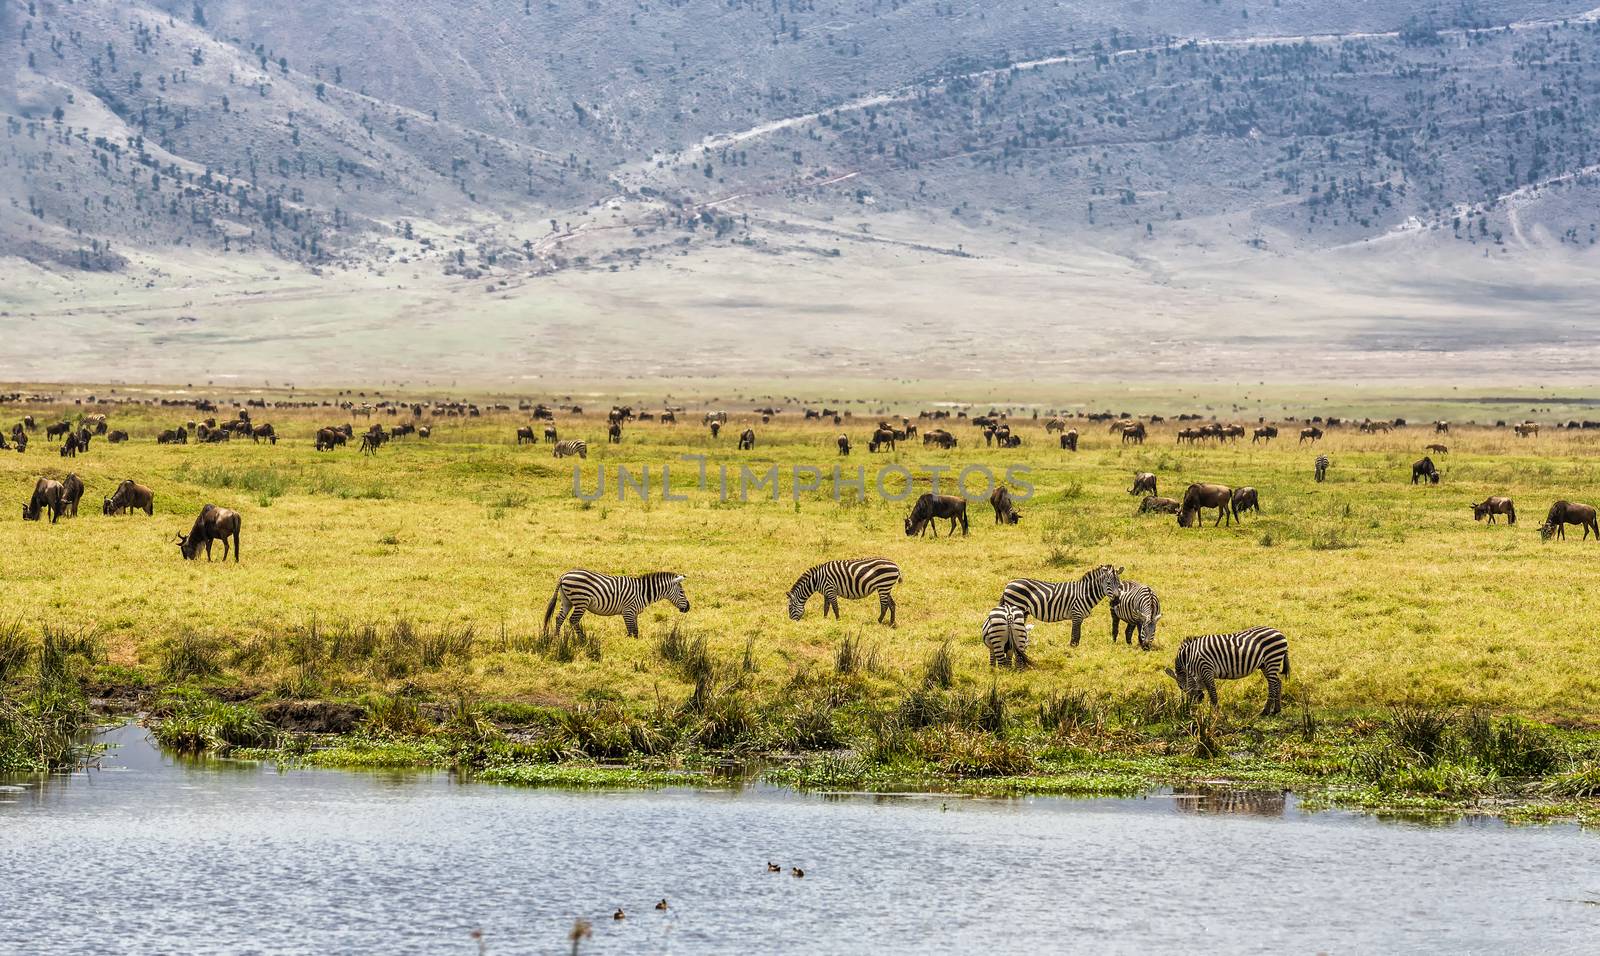 Herds of wildebeests and zebras in the Ngorongoro Crater, Tanzania.